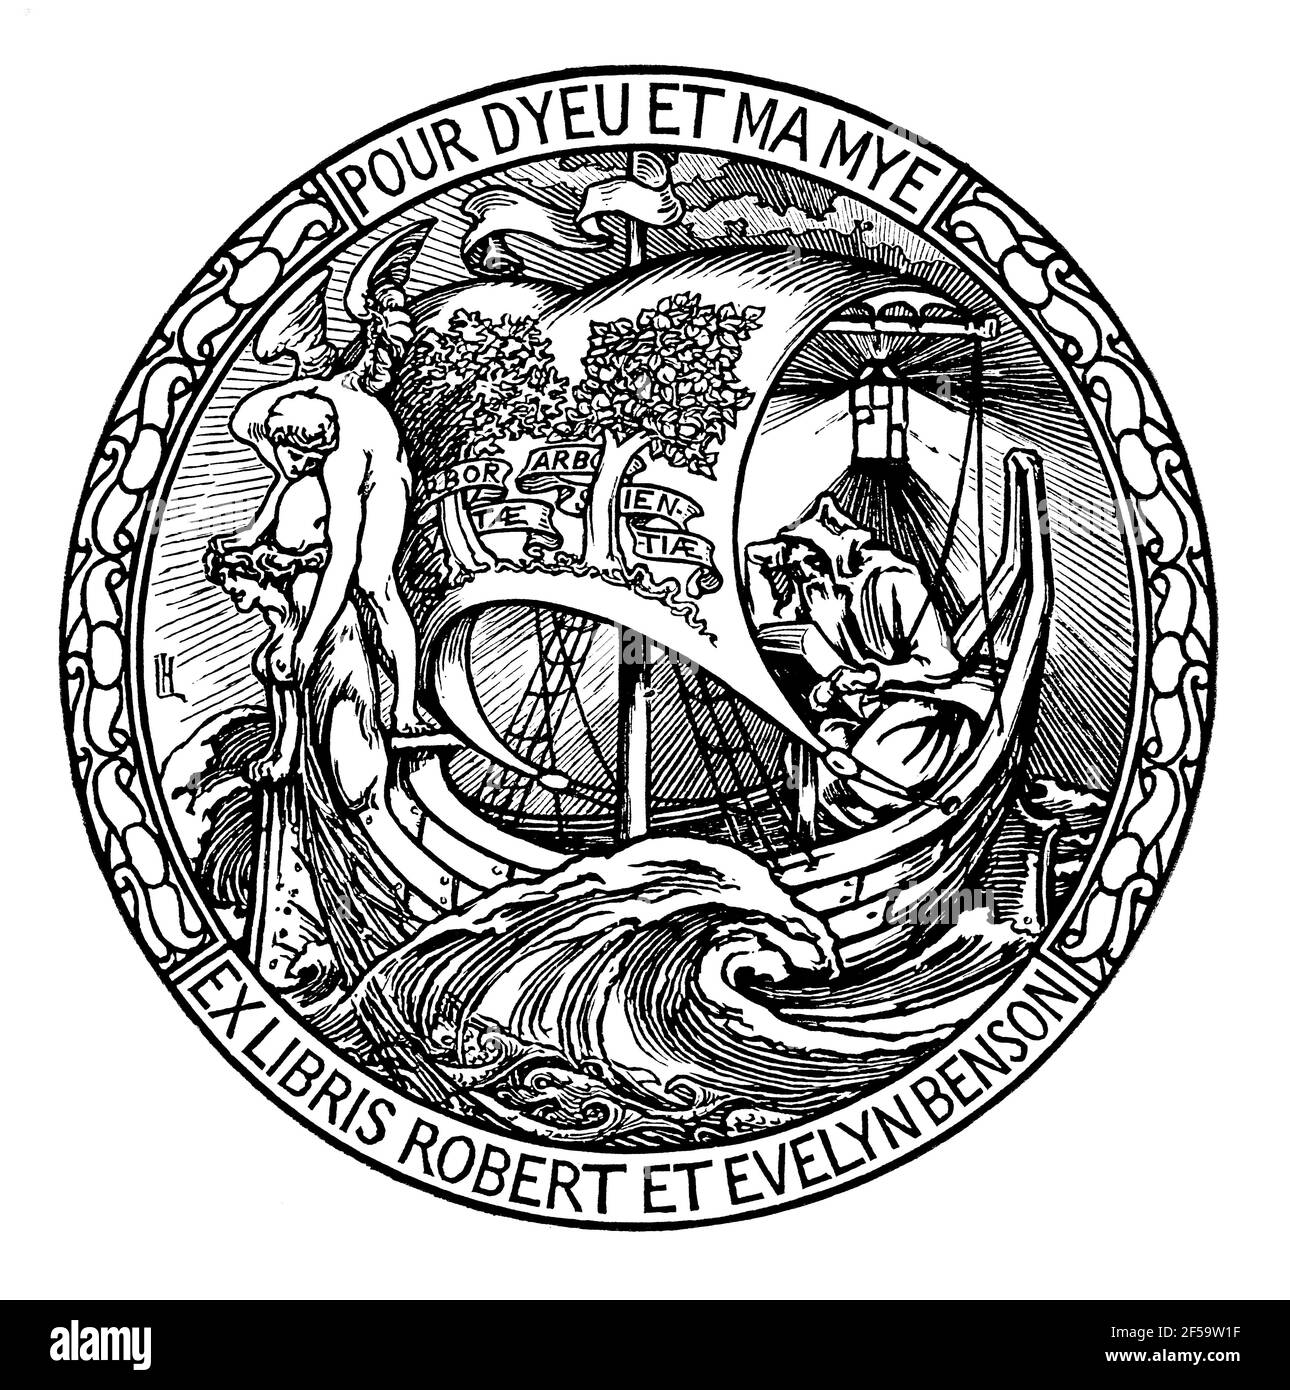 Circular Art nouveau ship and lighthouse bookplate with motto ‘Pour dyeu et Mamye’ for banker Robert and Evelyn Benson by Laurence Housman Stock Photo